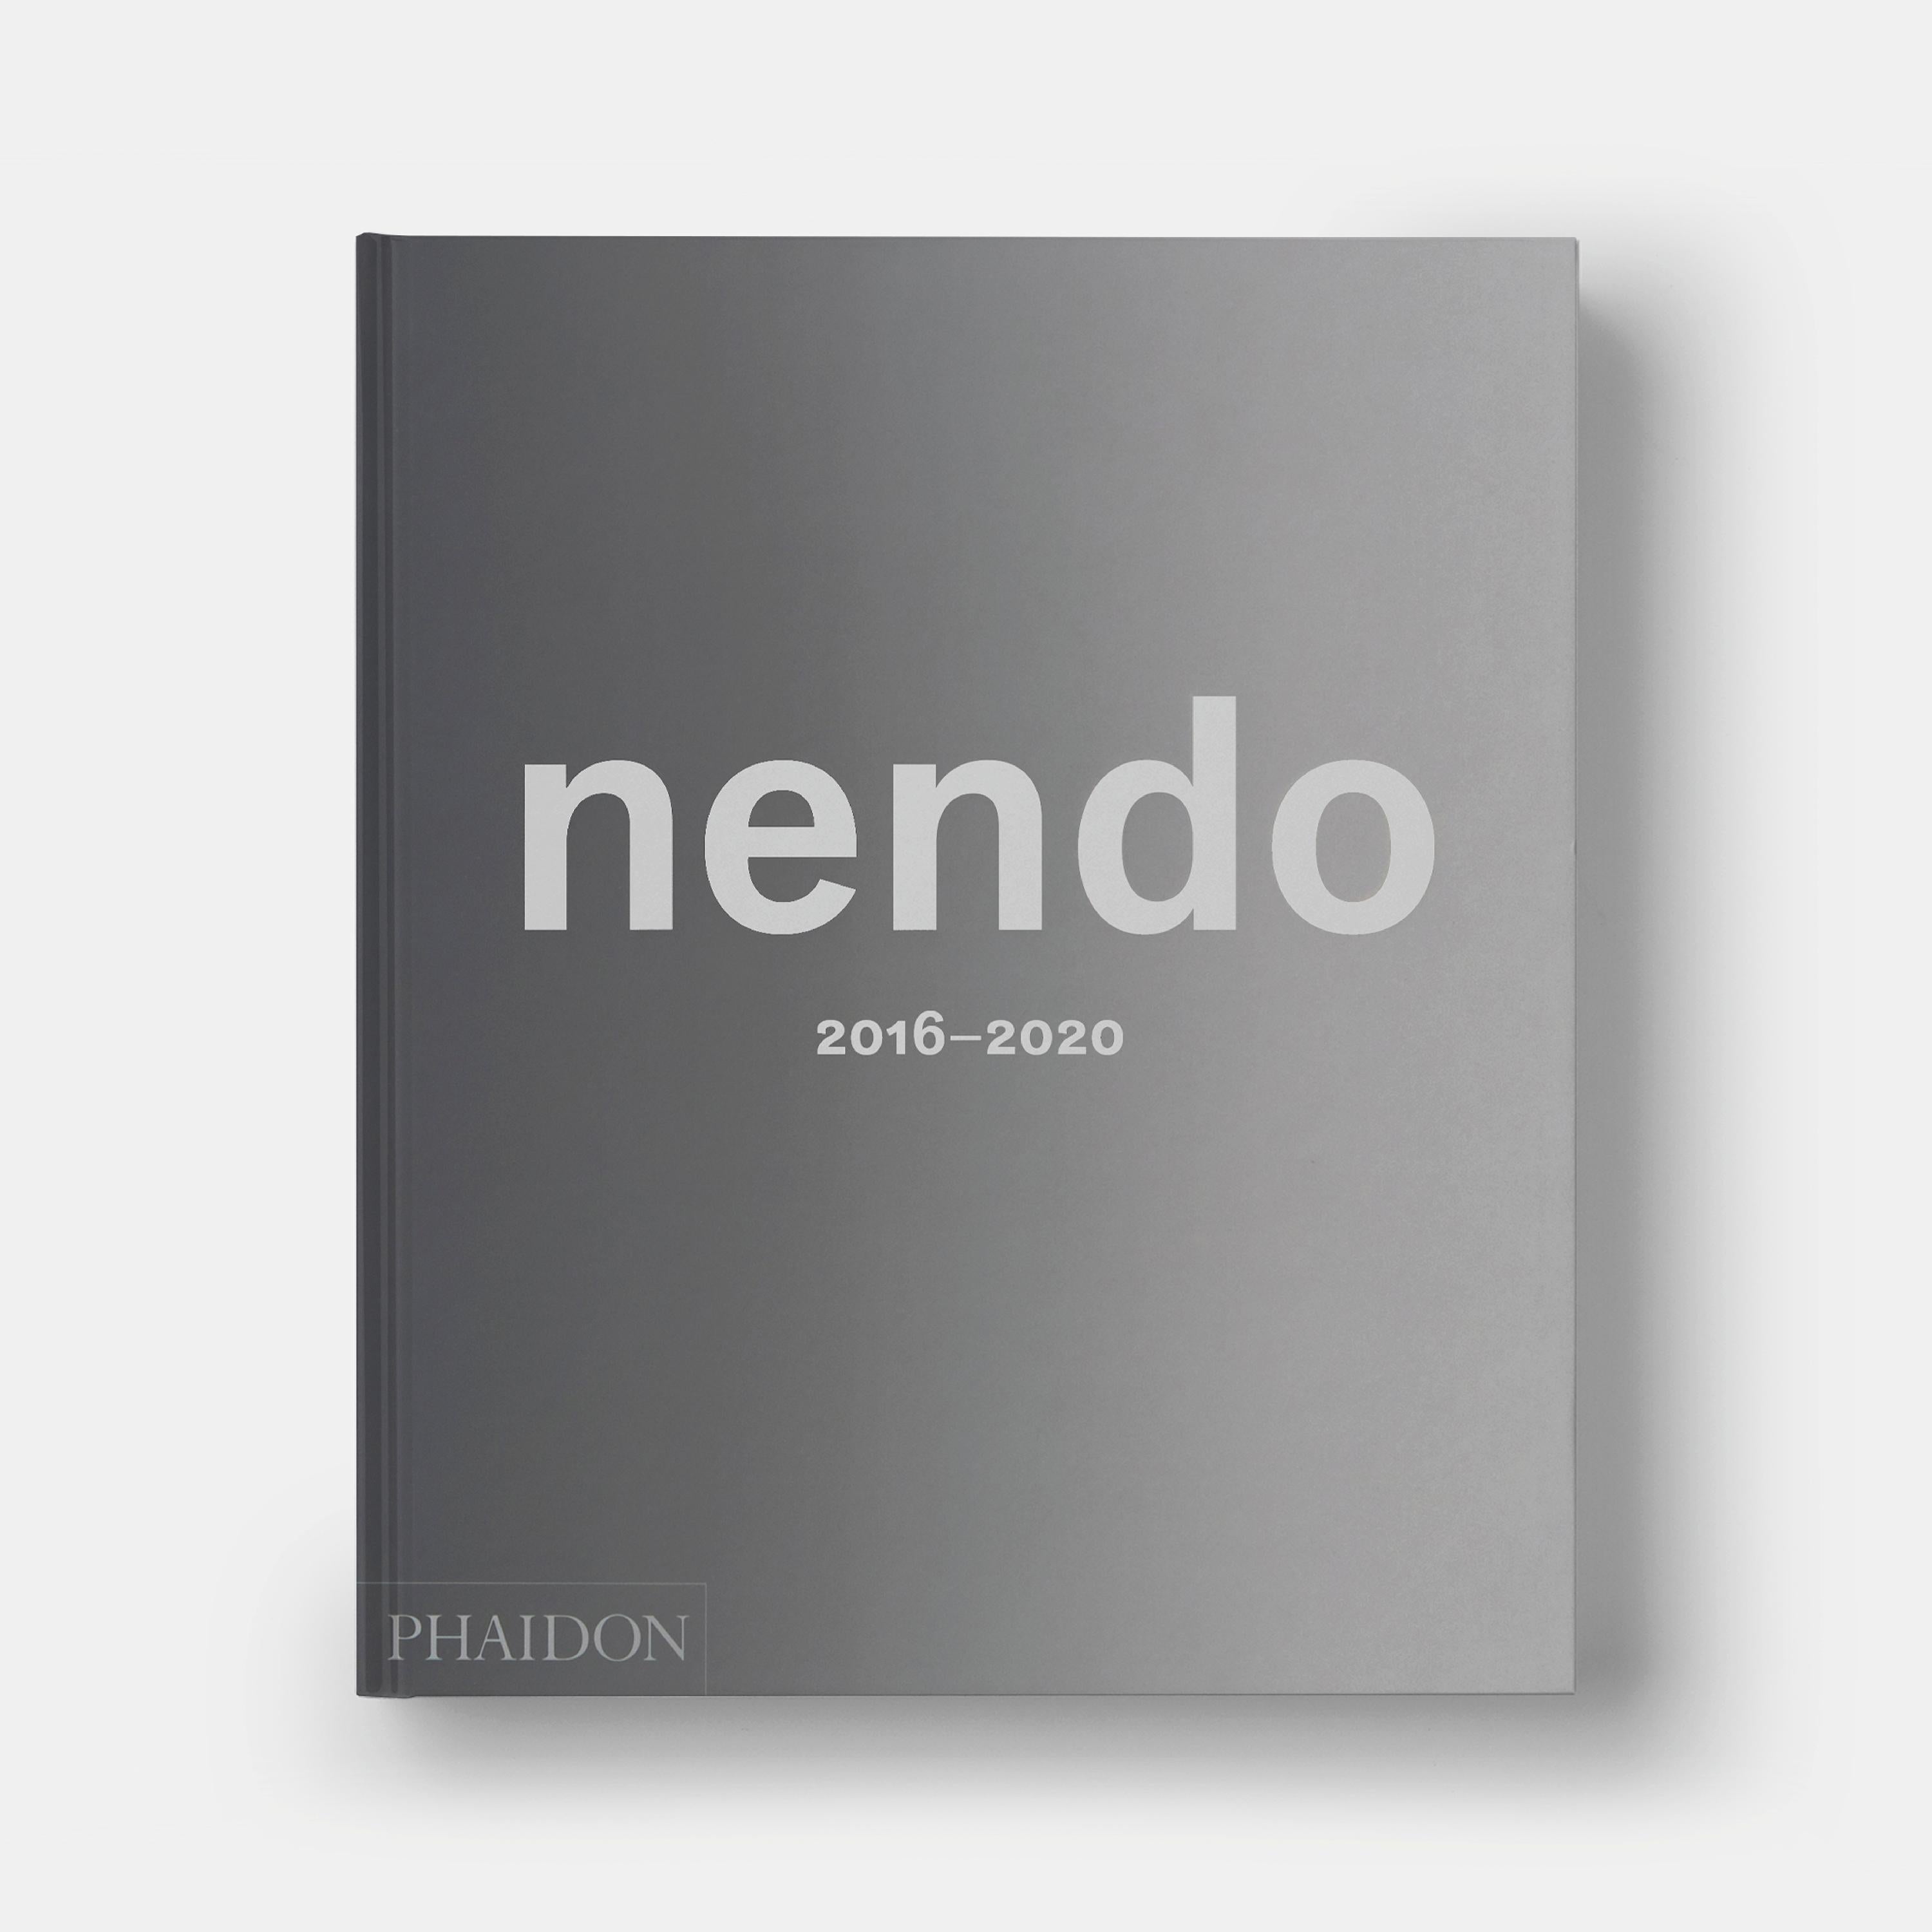 A brand-new monograph celebrating one of the most sought-after design studios working today

nendo's extensive, idiosyncratic body of work flows seamlessly across disciplines, and is executed in every medium imaginable - from paper clips to watches,